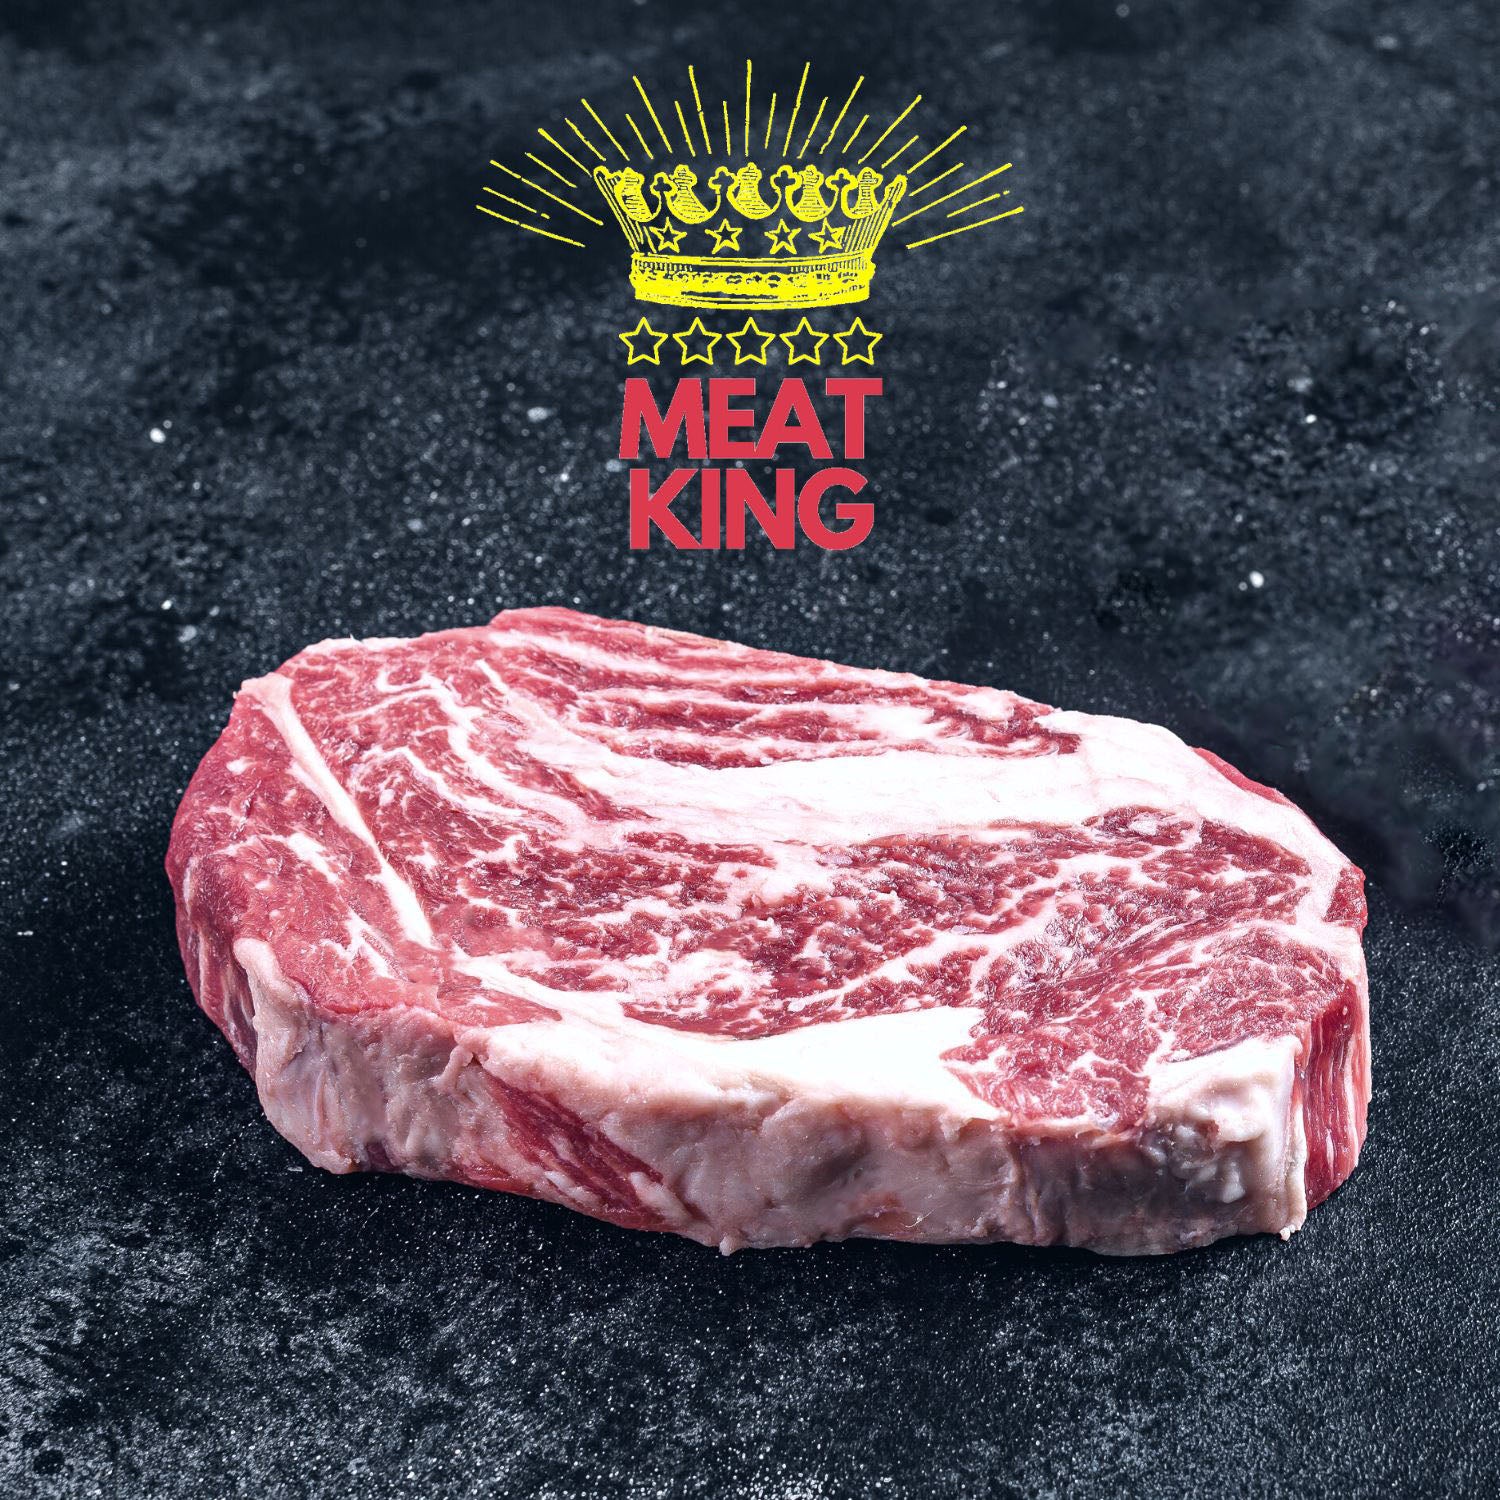 Image of Meat King's premium cuts of meat, available for online ordering.